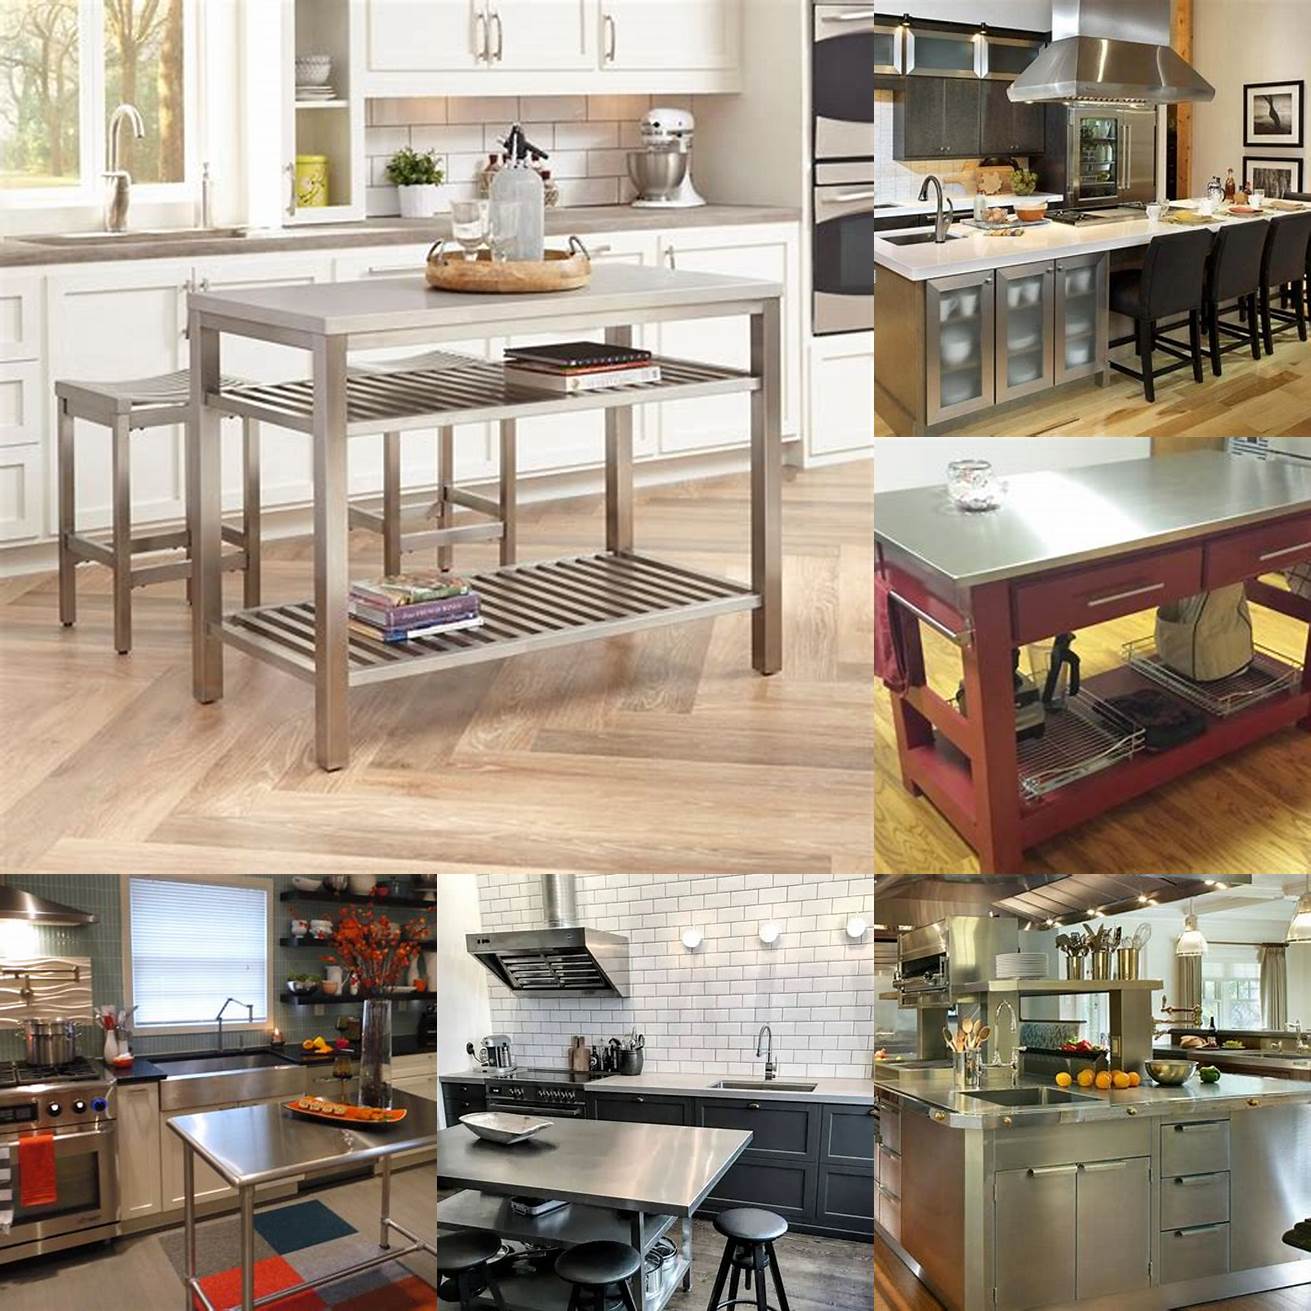 A stainless steel kitchen island with a built-in range